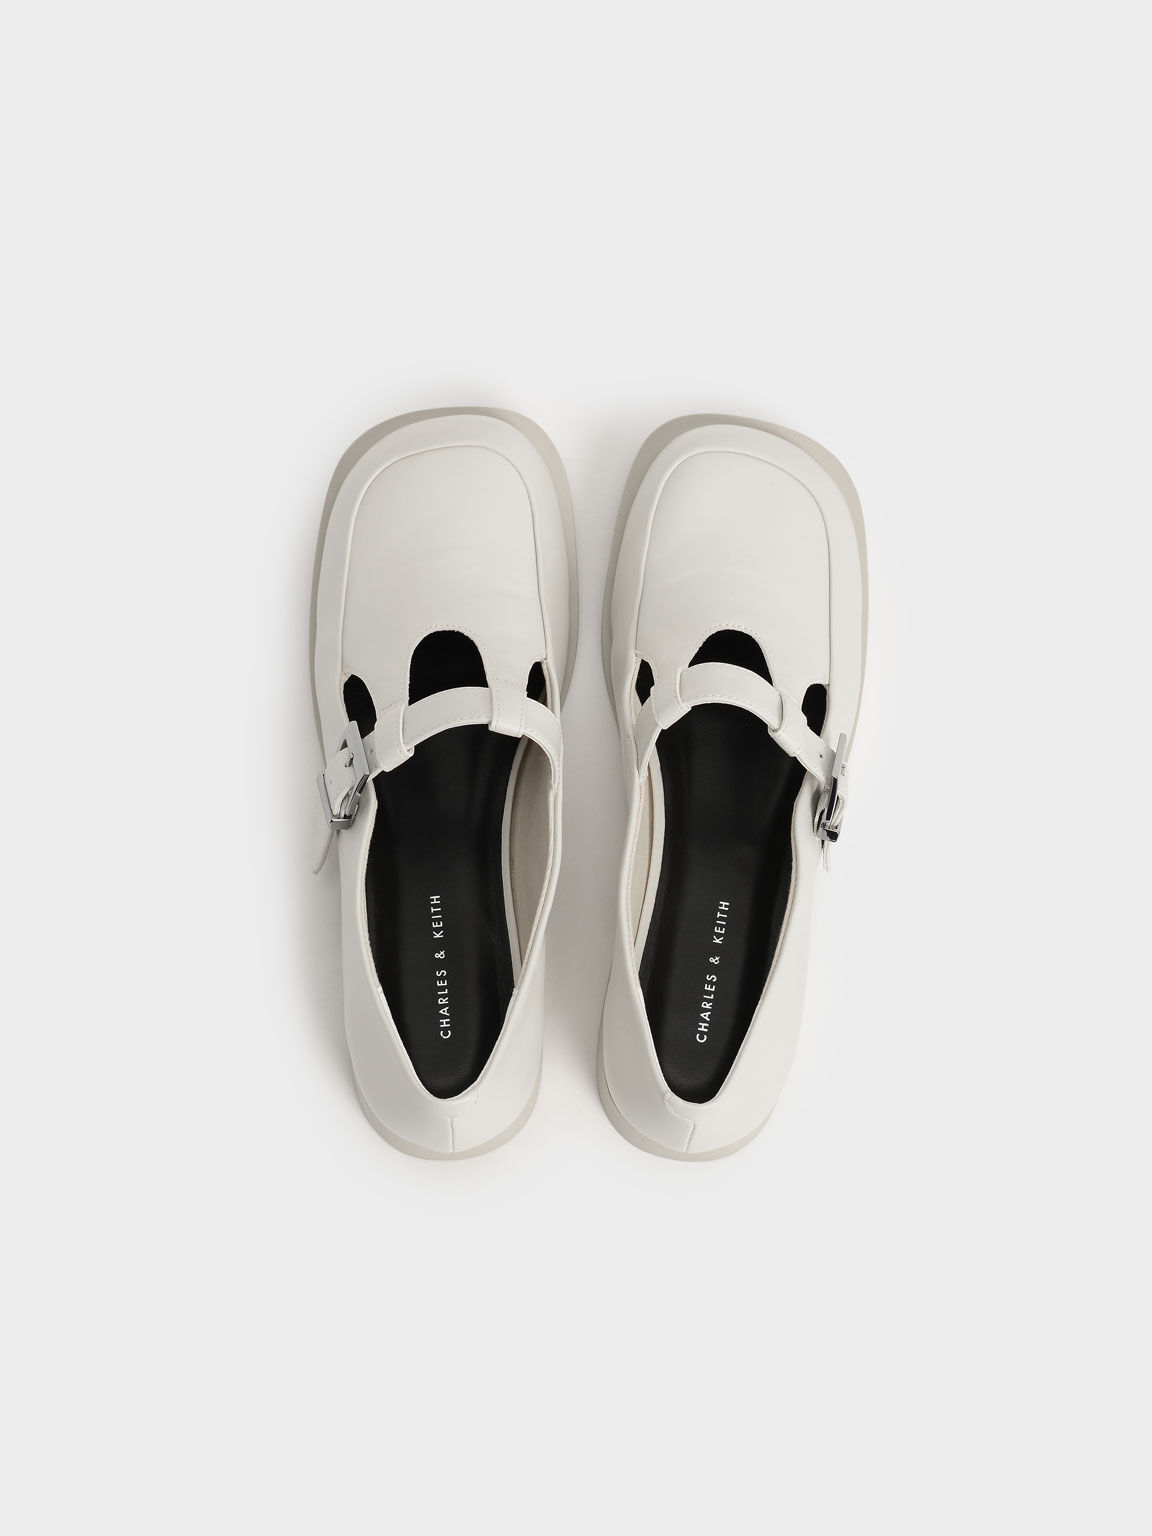 Mary Jane Buckle Loafers, Chalk, hi-res